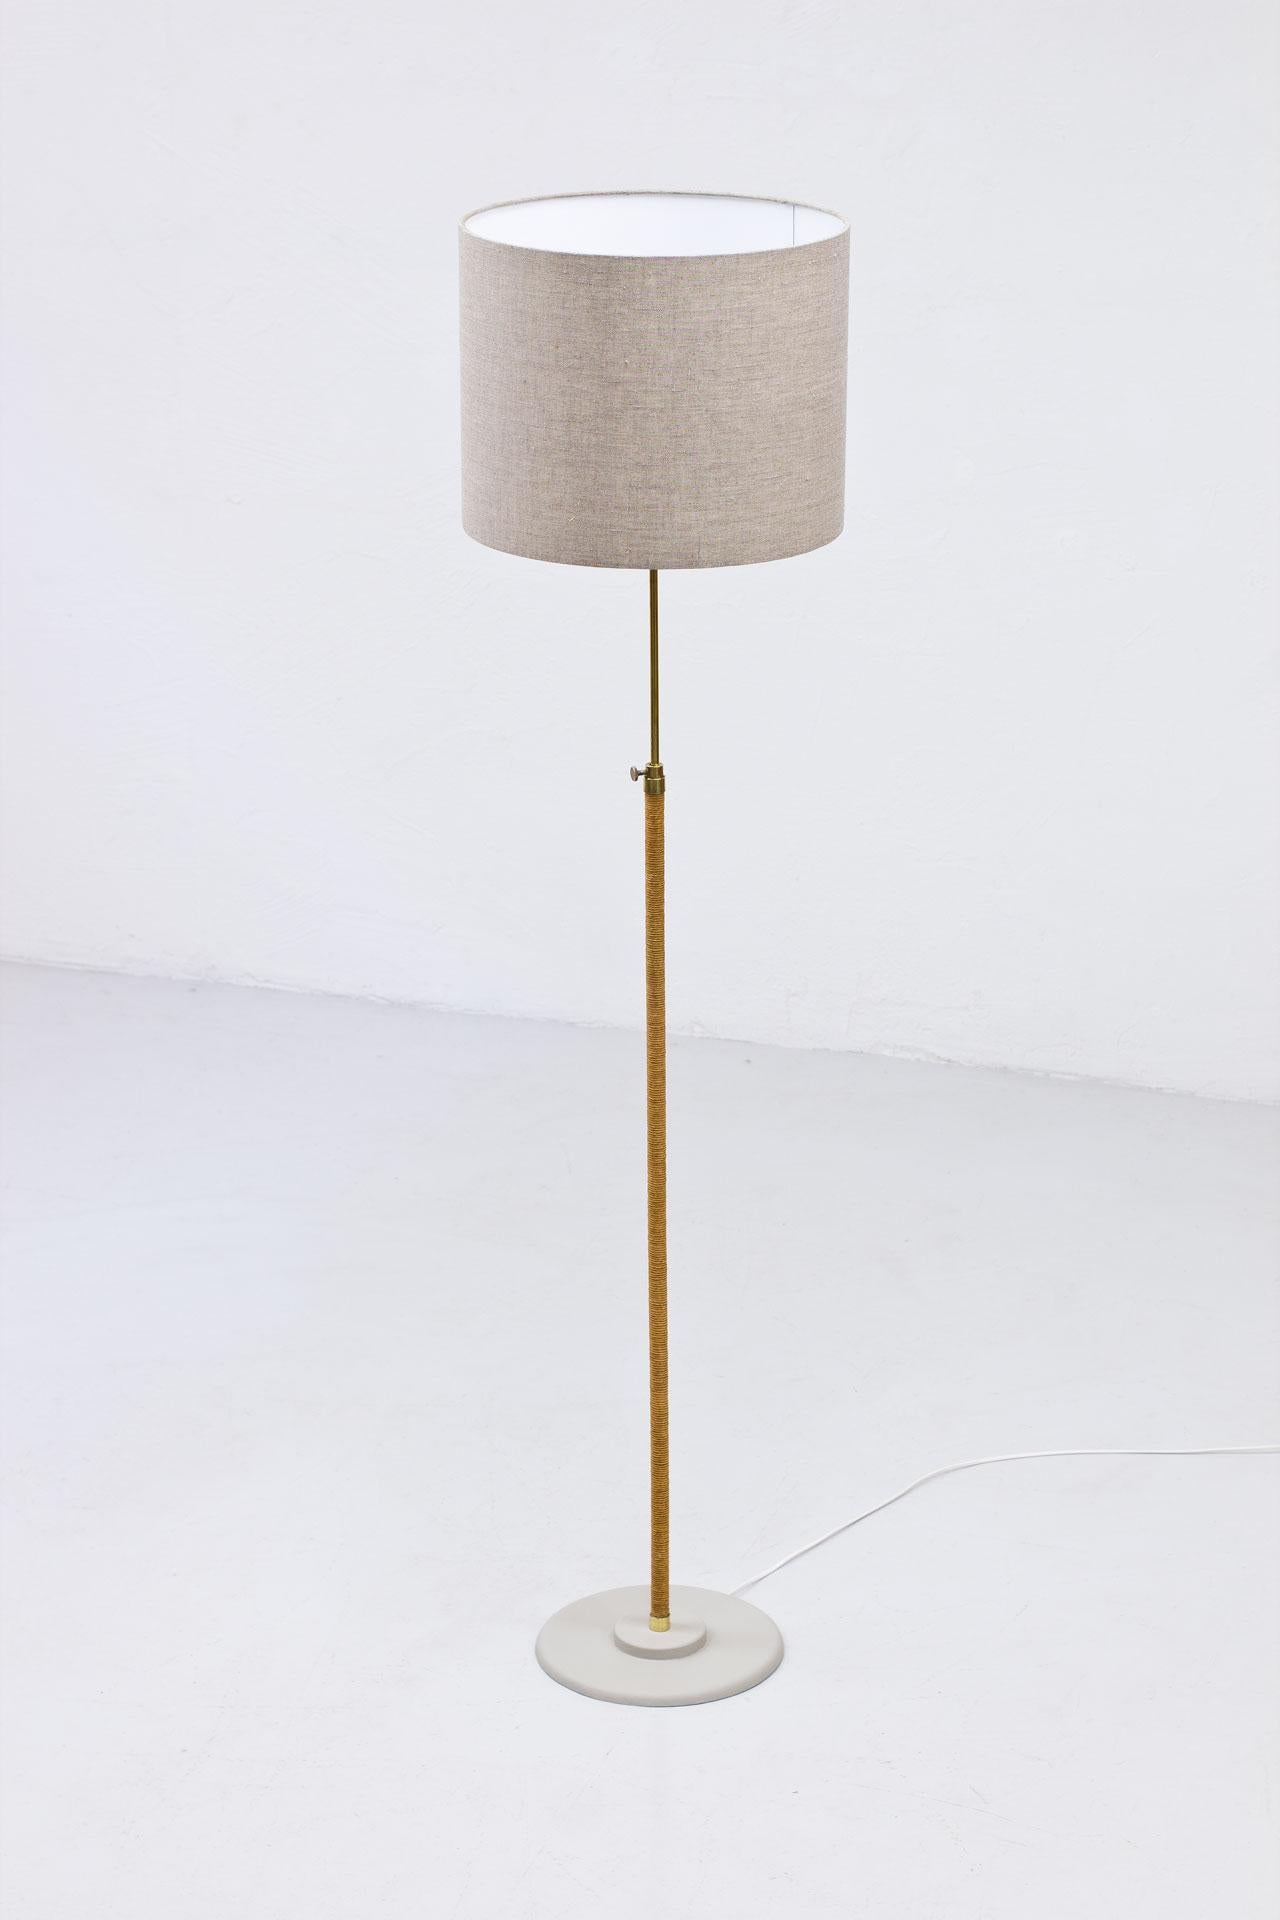 Scandinavian design floor lamp from an unknown maker. 
Most likely manufactured in Sweden during the 1940s. 
Polished brass, with lower section wrapped in rope stem. Lacquered metal base.
The stem is adjustable in the height. New wiring with